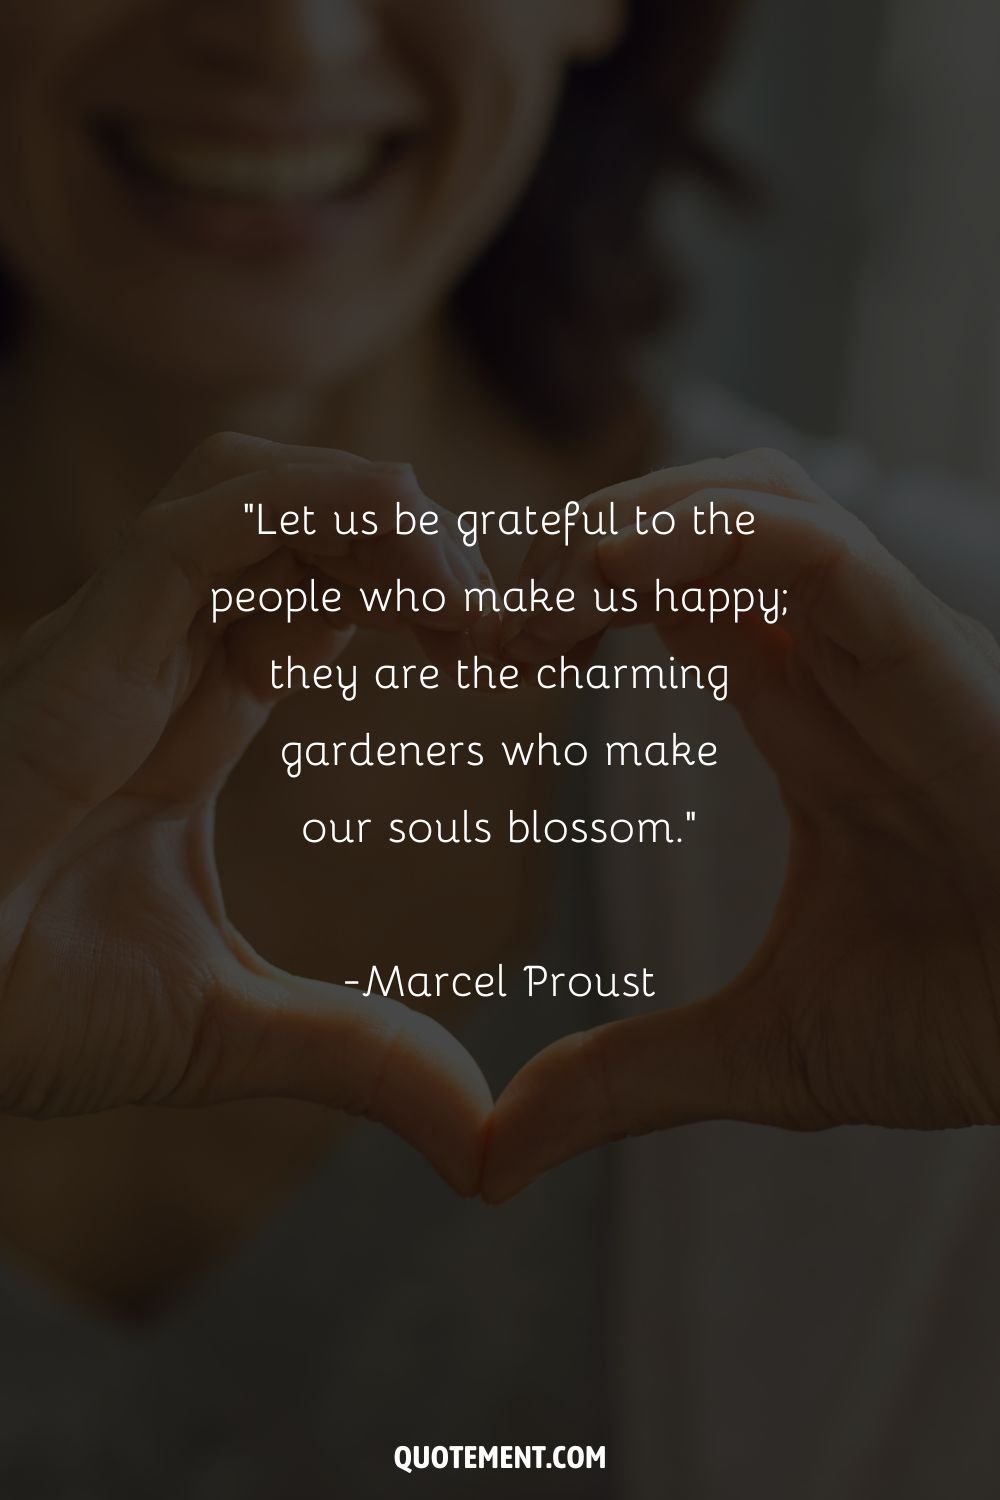 Let us be grateful to the people who make us happy